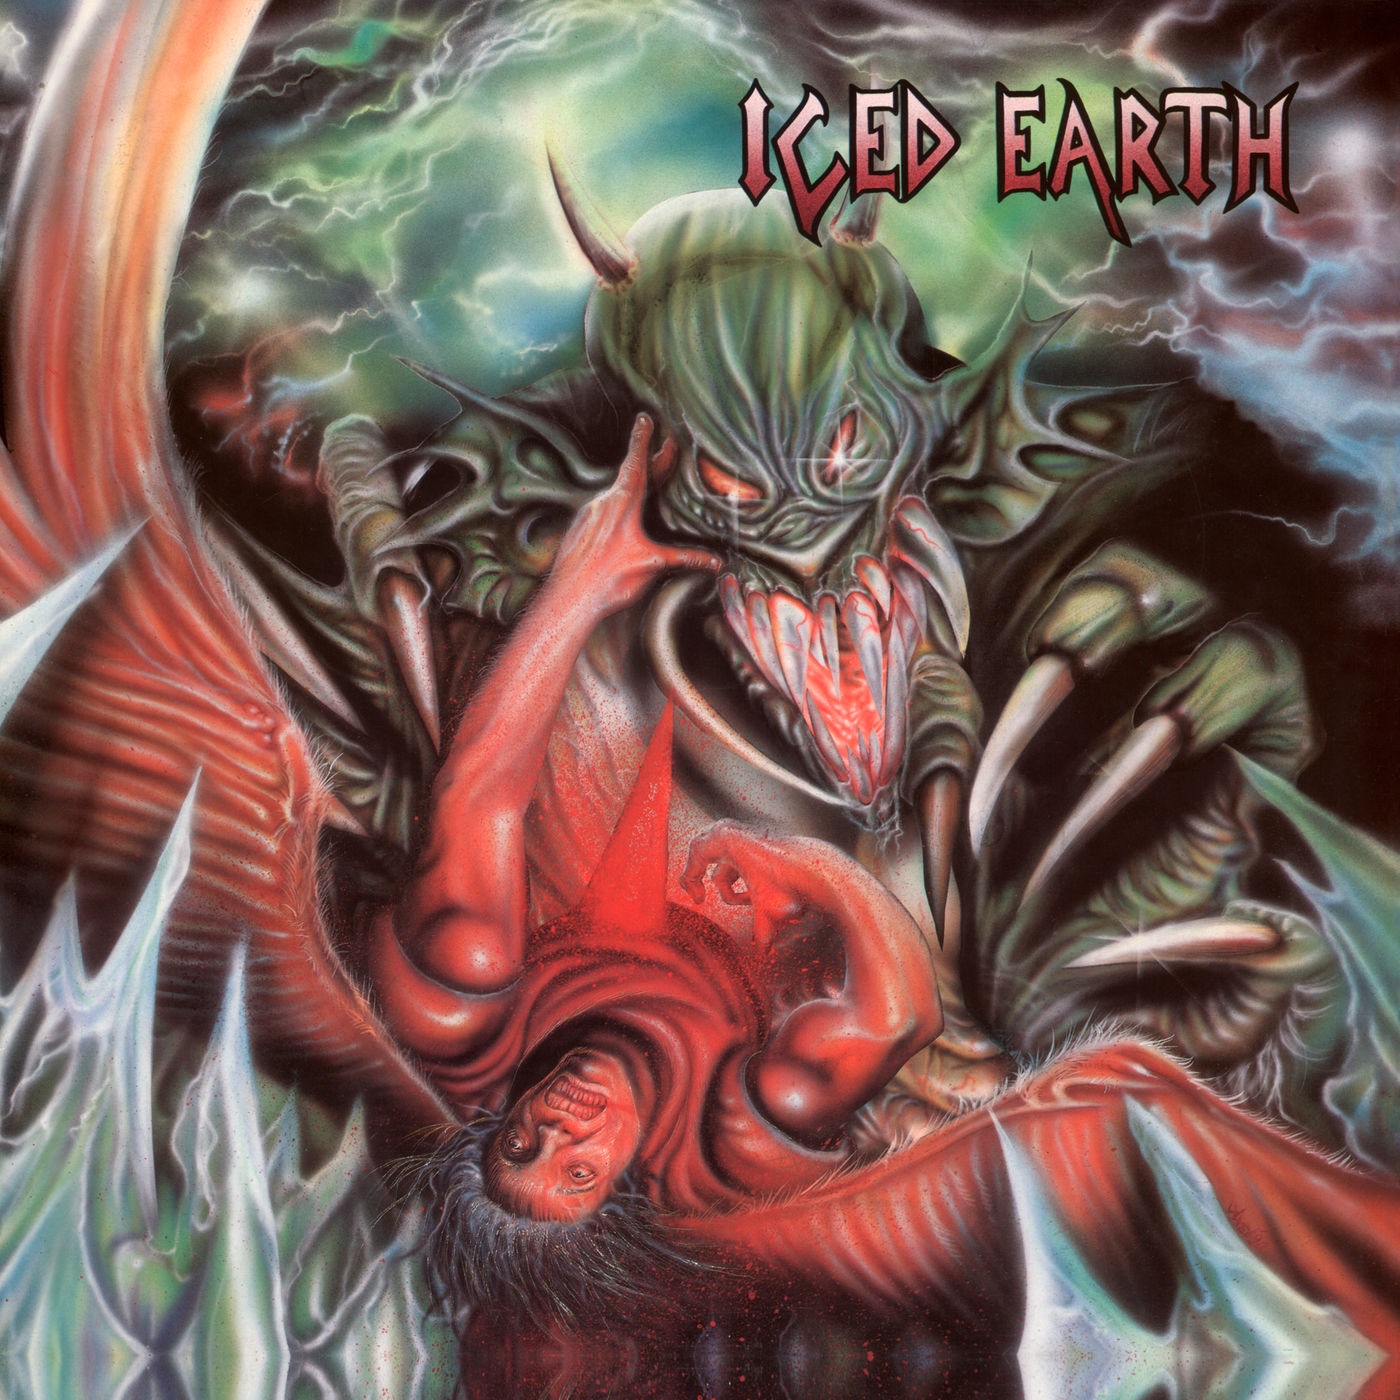 Iced Earth – Iced Earth (30th Anniversary Edition) (Remixed & Remastered) (1990/2020) [FLAC 24bit/96kHz]